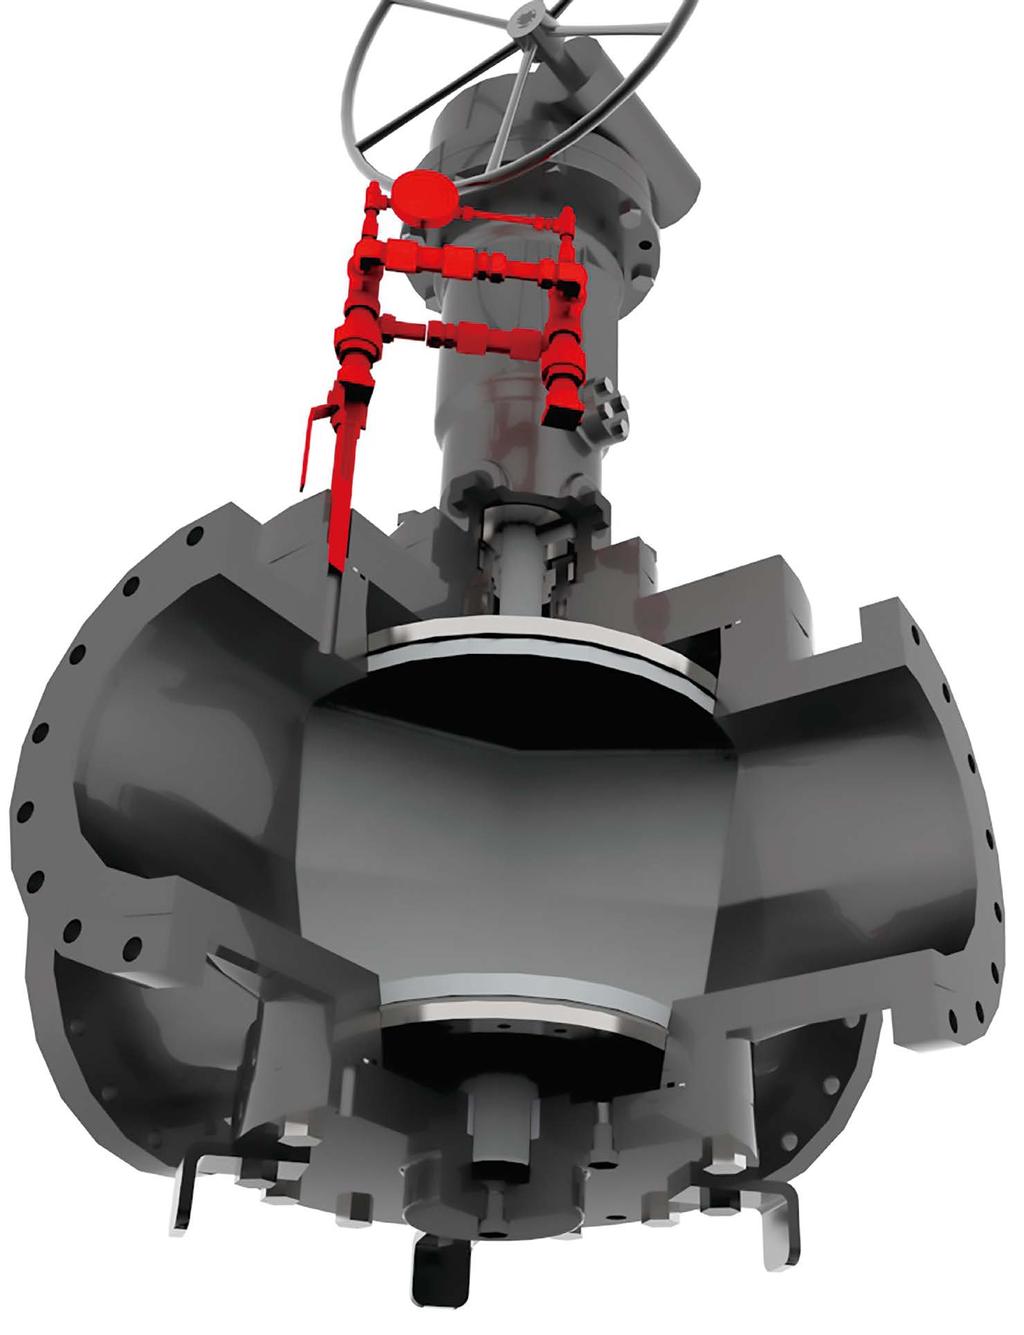 4-Way Diverter Plug Valve 3Z 4-way diverter plug valves are designed for the rigid requirements of bi-directional meter proving which especially requires the